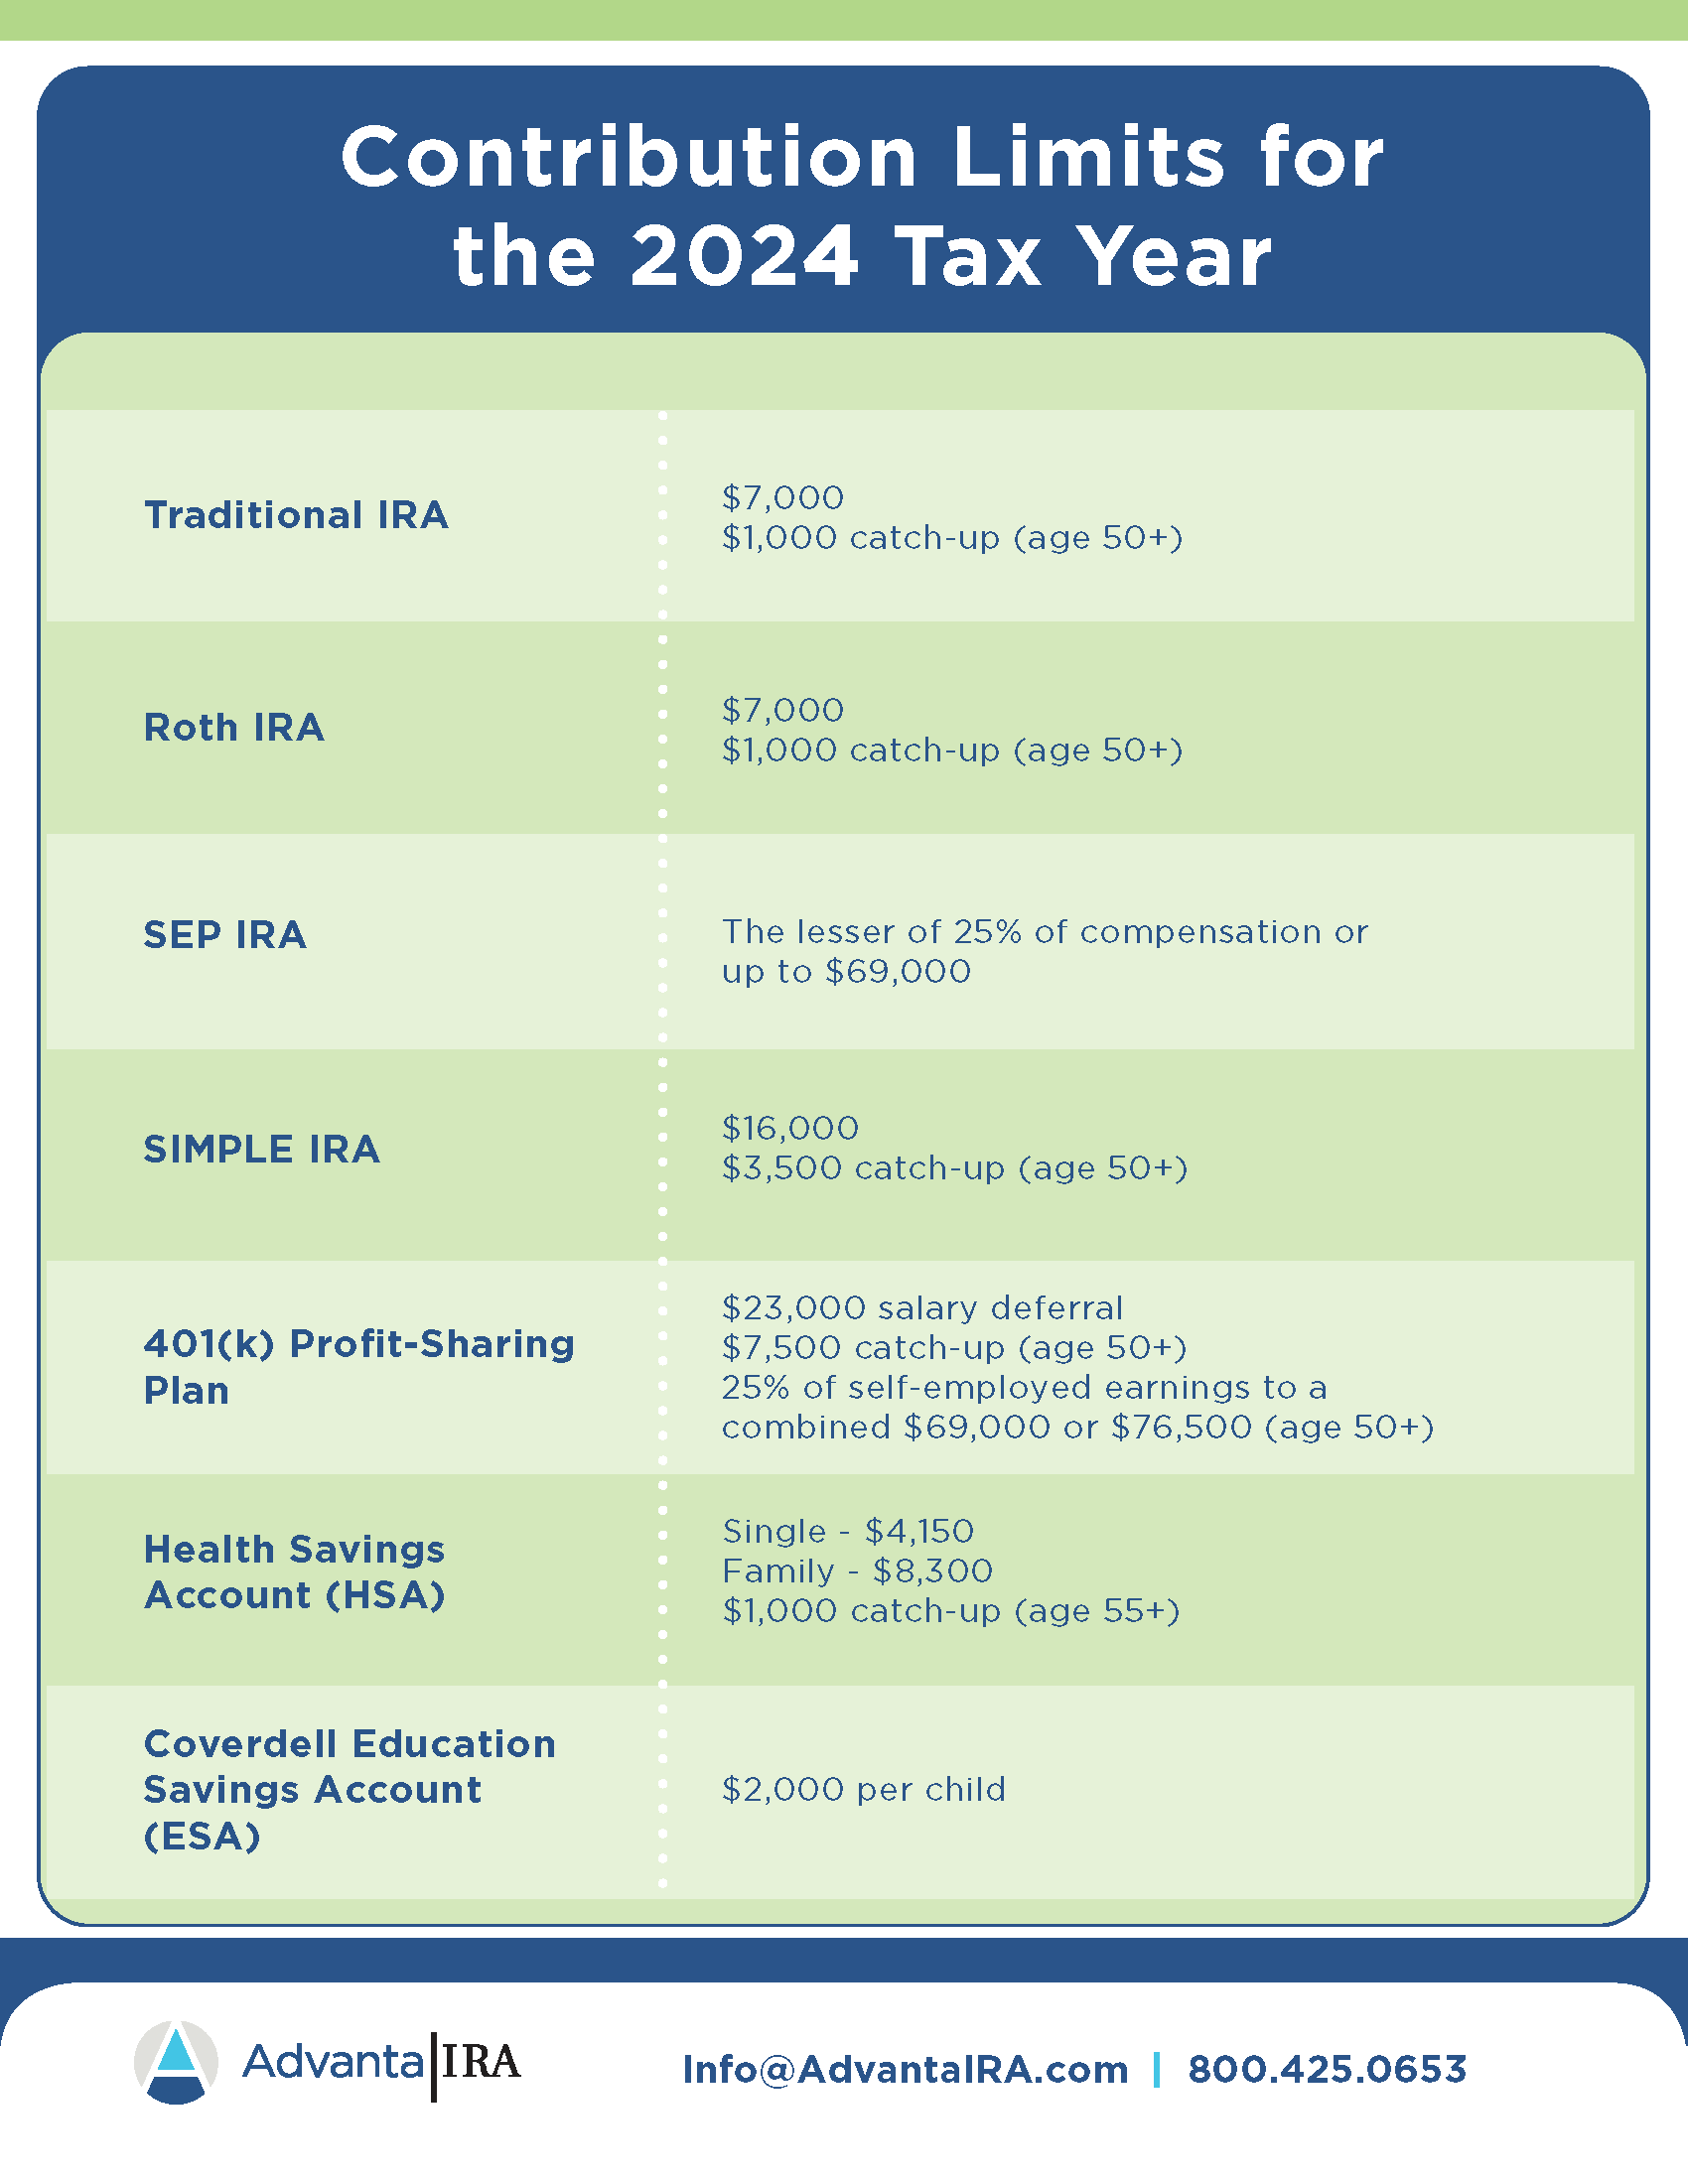 This chart details the IRA contribution limits for the 2024 tax year.